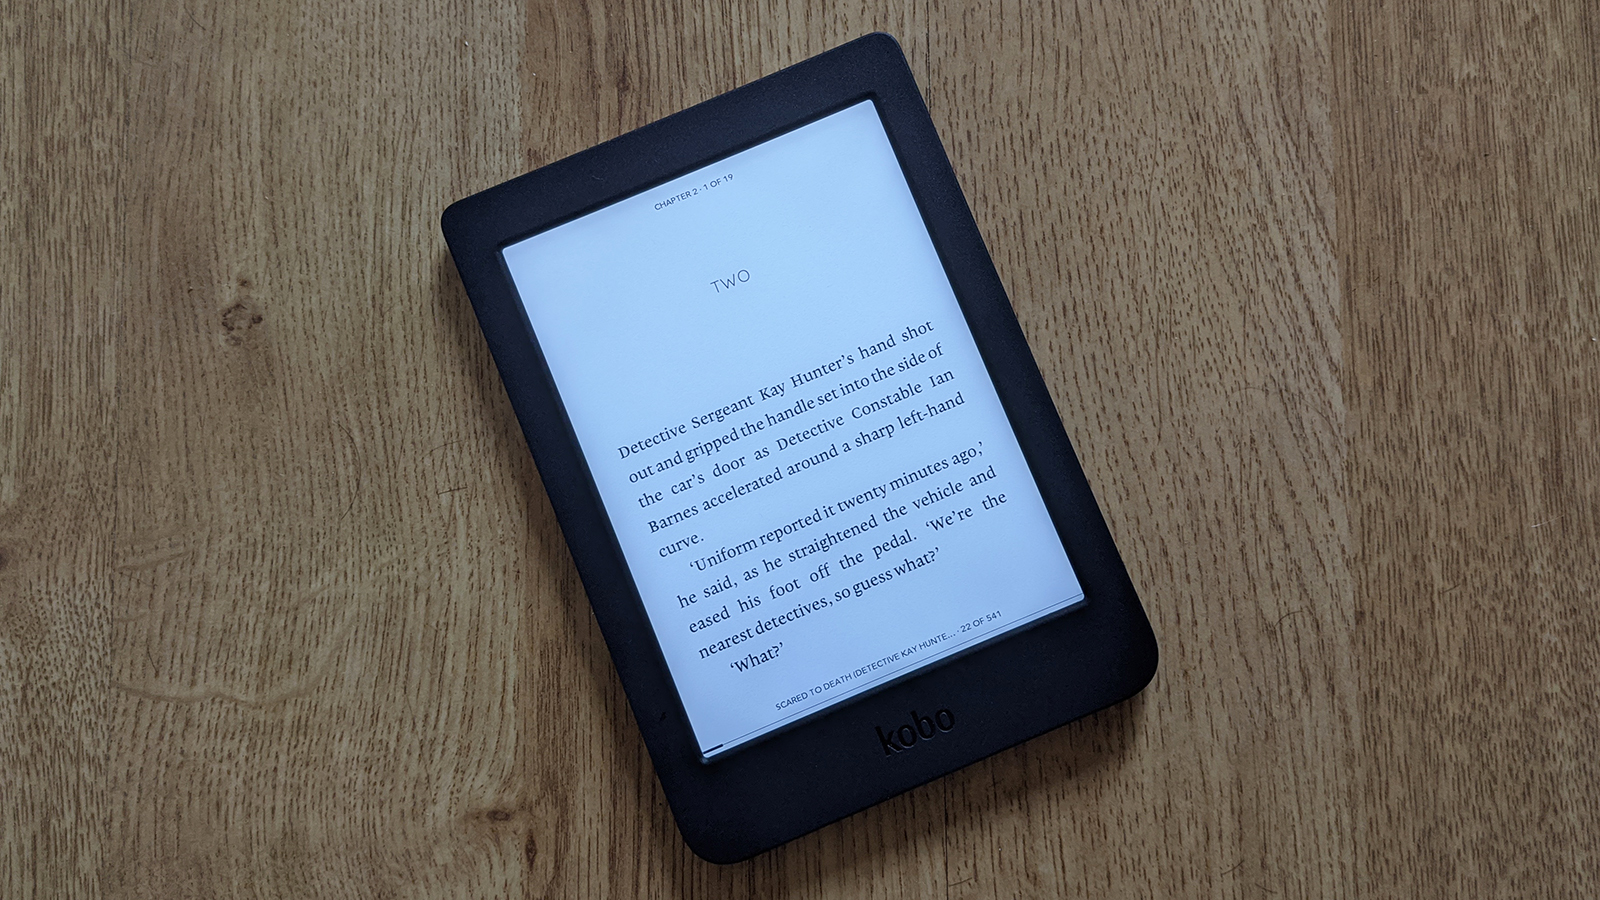 Kobo Nia Review: Upping The Ante For Entry-Level eReaders